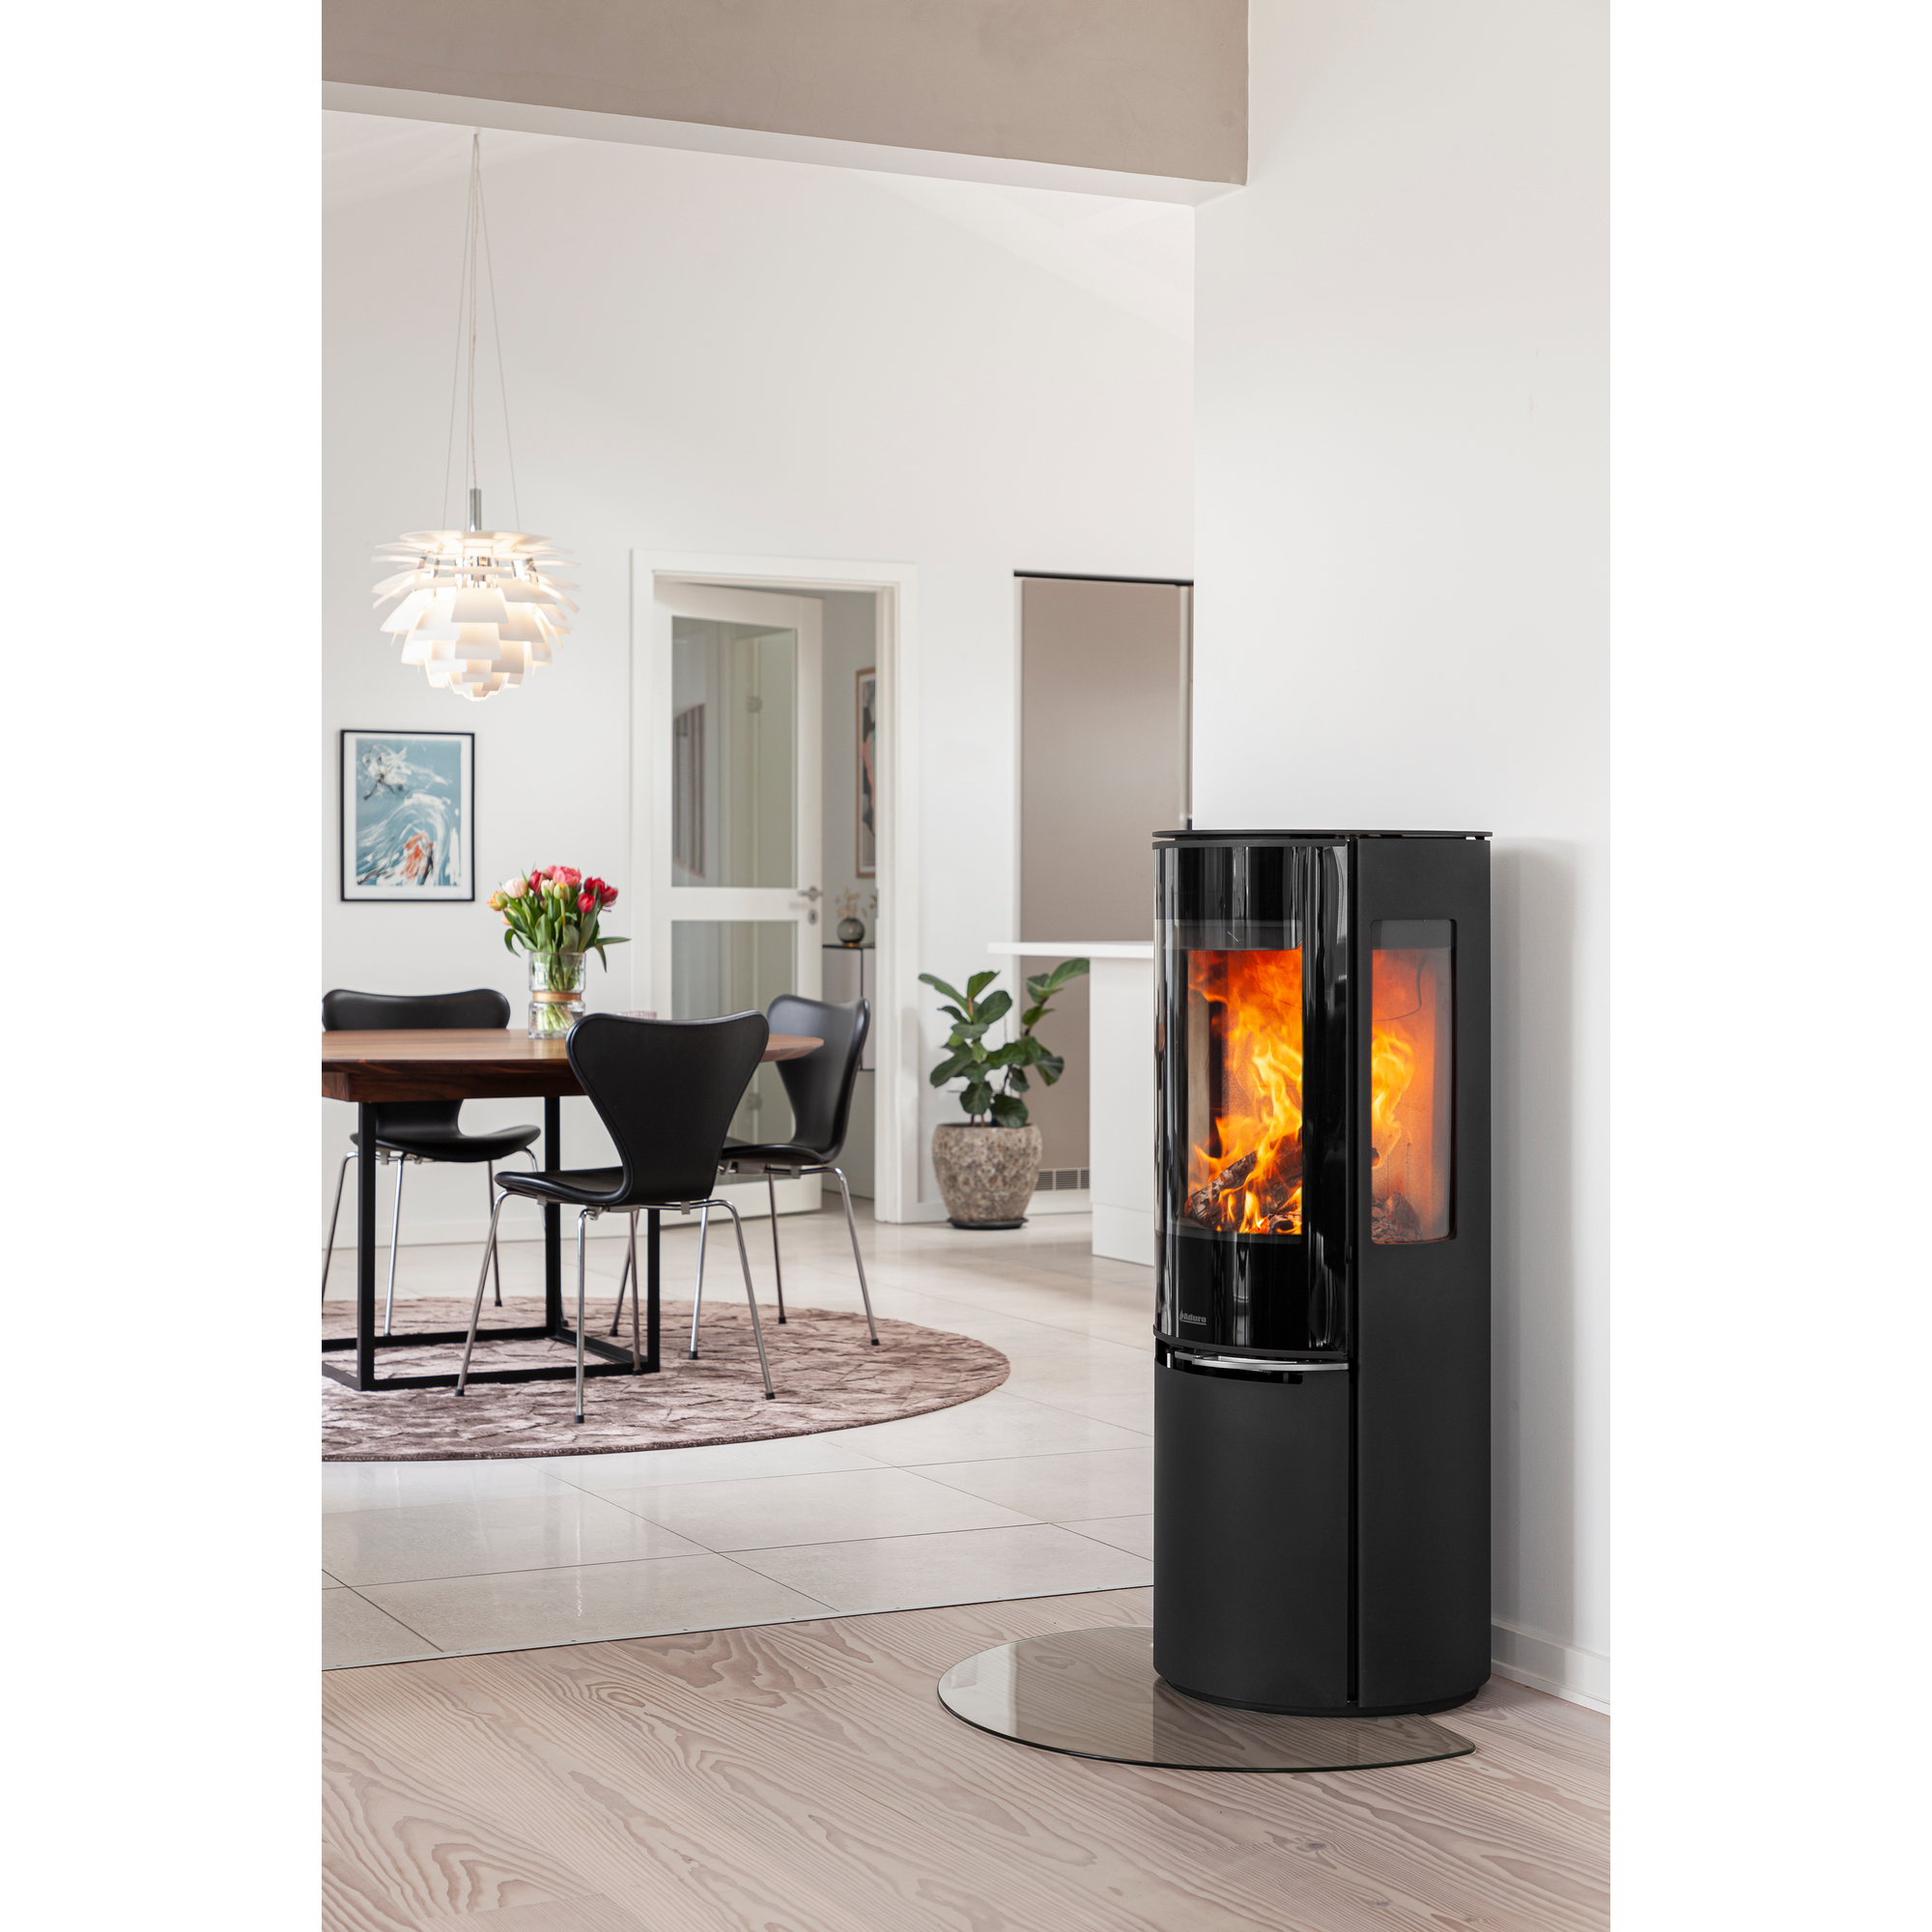 Kaminofen '22.5 Lux' Stahl 5,5 kW + product picture